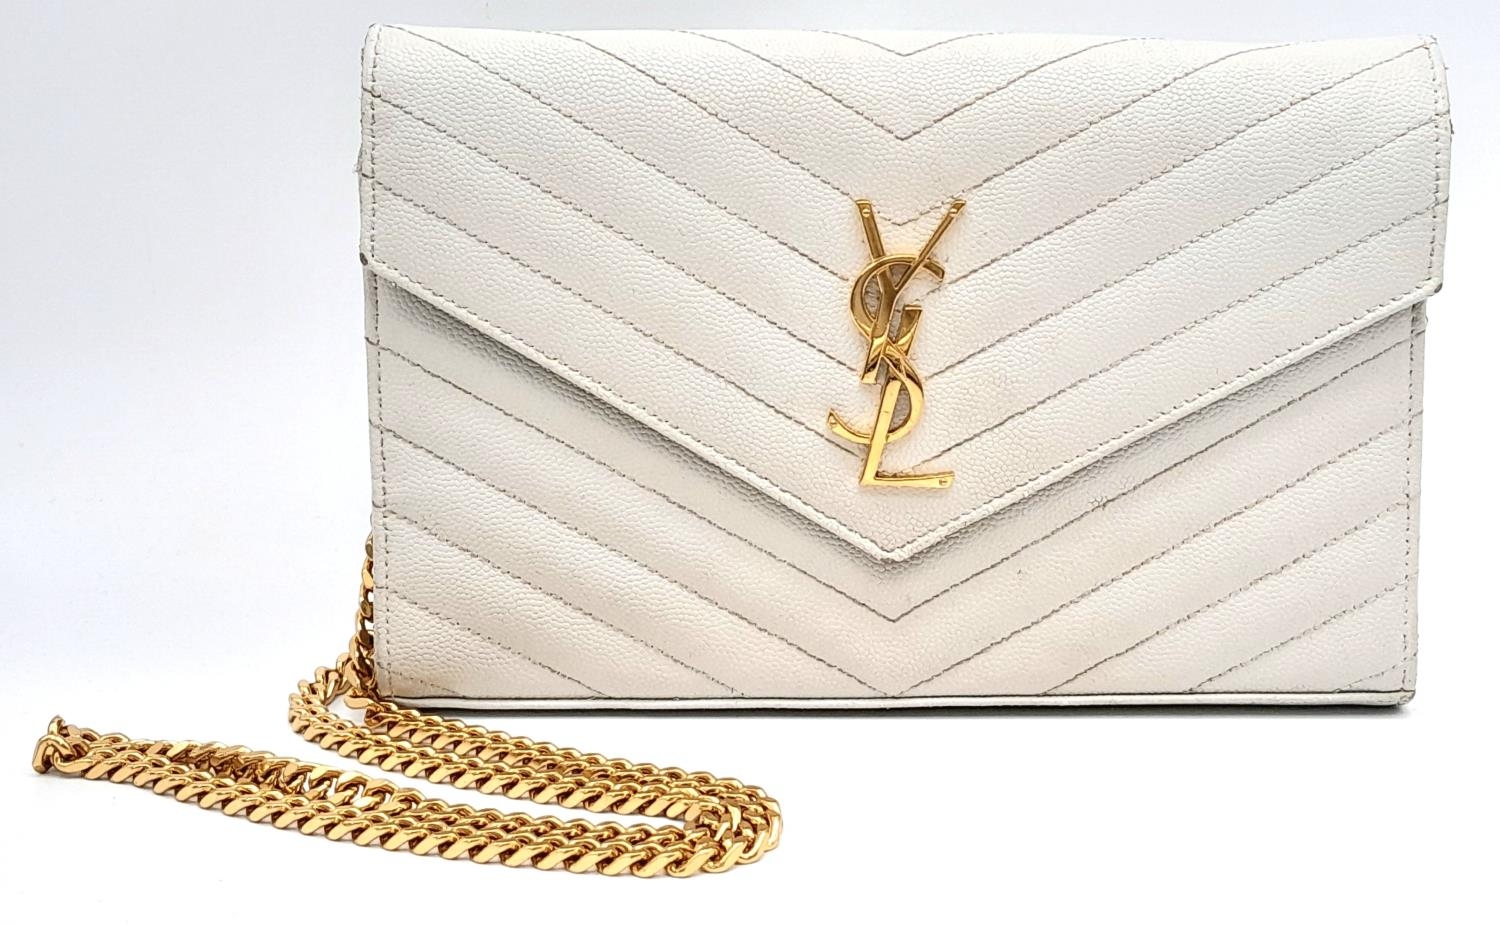 A YSL Ivory Cassandre Wallet Bag. Leather exterior with gold-toned hardware, the iconic YSL logo,